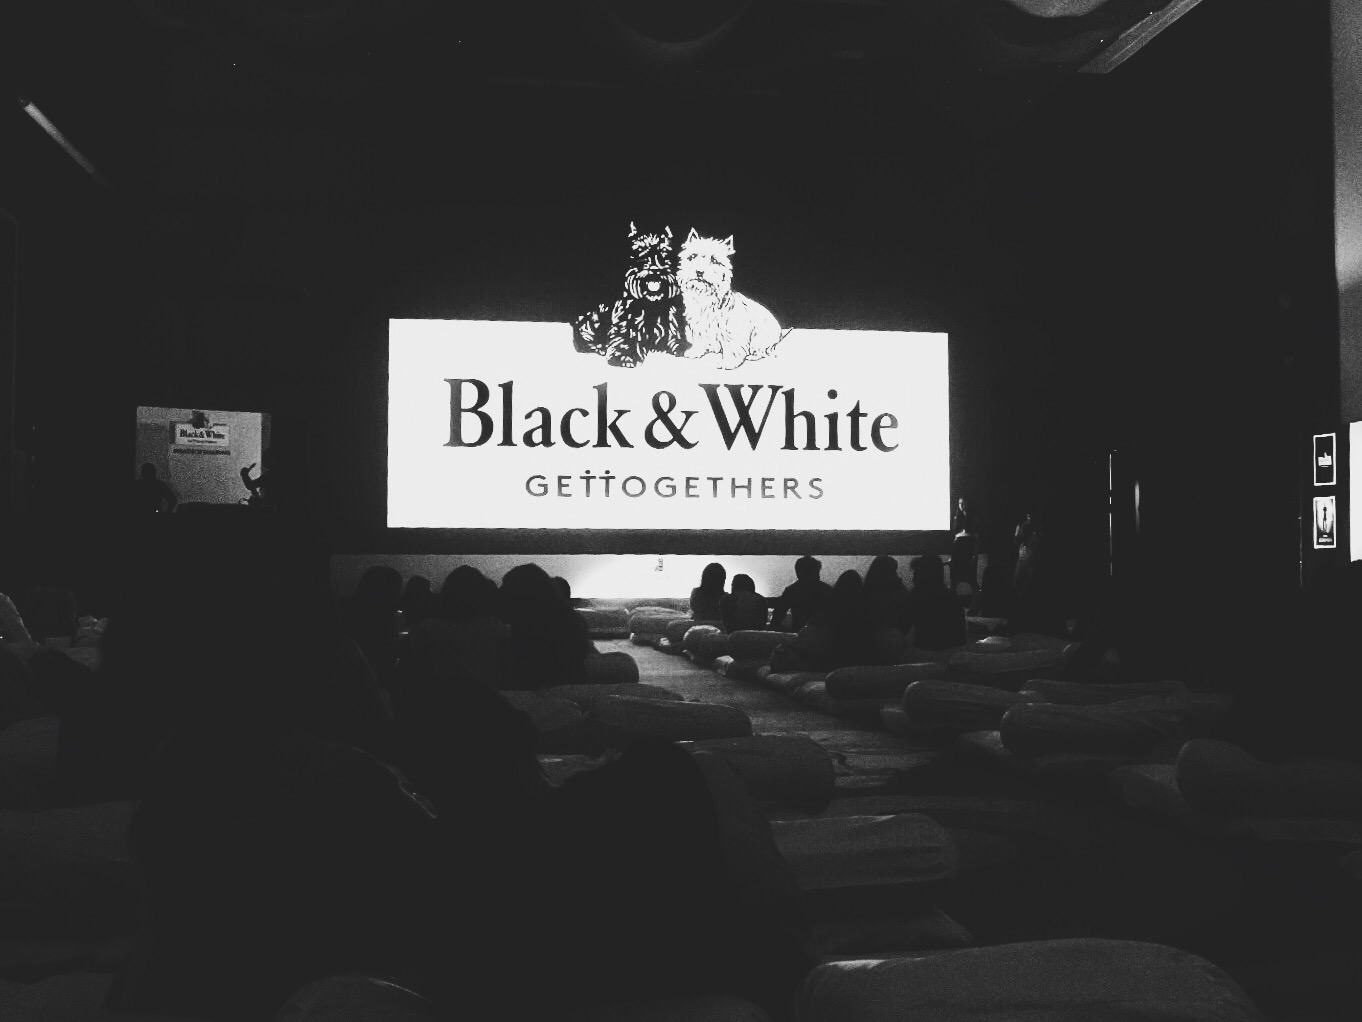 Watching Deadpool with Black and White